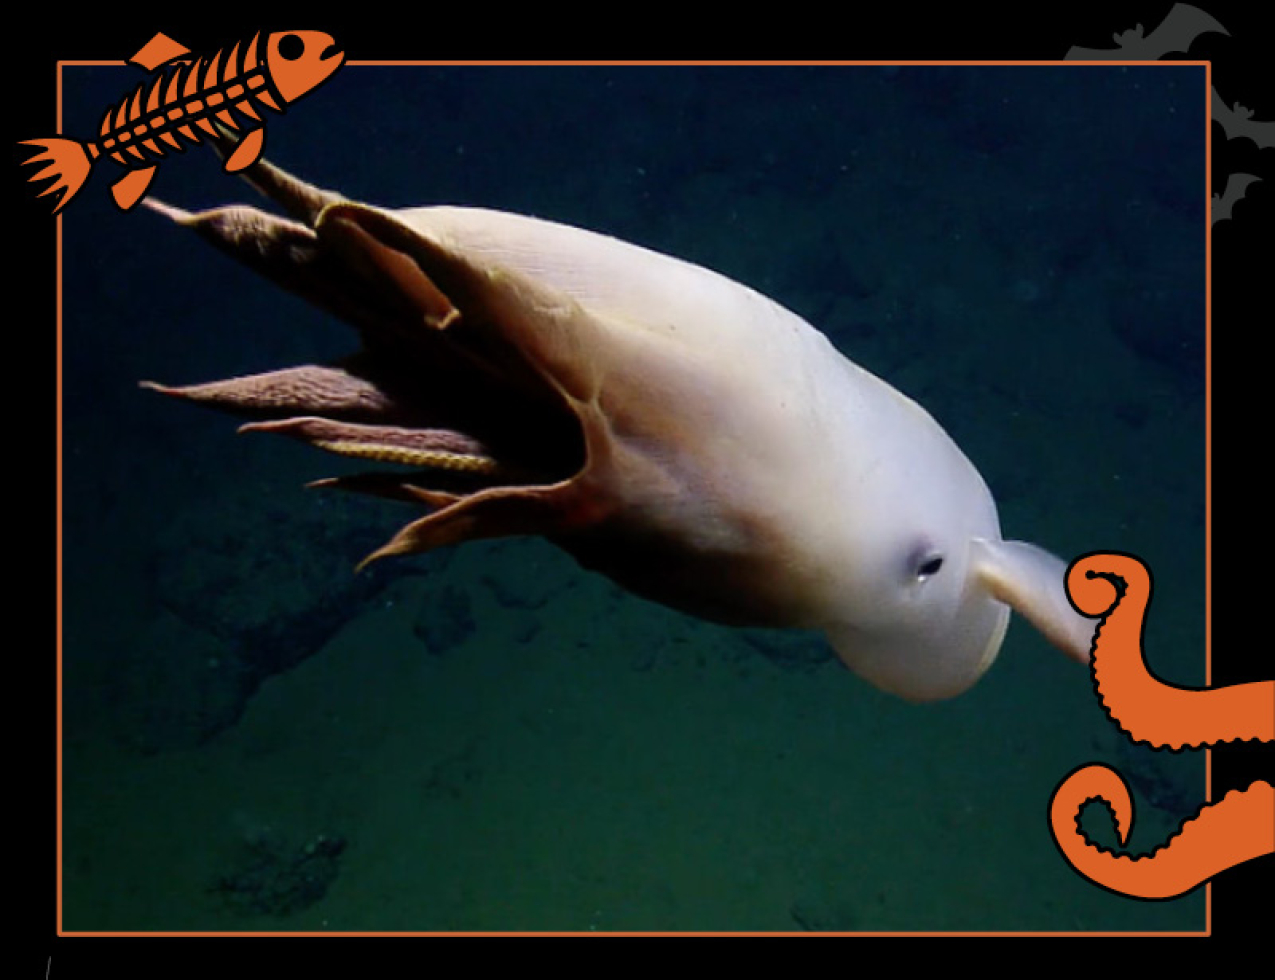 An umbrella octopus swims through the deep ocean. The octopus is a cloudy pinkish-white color. Border of the photo is black with orange sea creature graphics of octopus tentacles and a fish skeleton. Text:Tentacles from the deep, #NOAASpookyScience with NOAA logo.